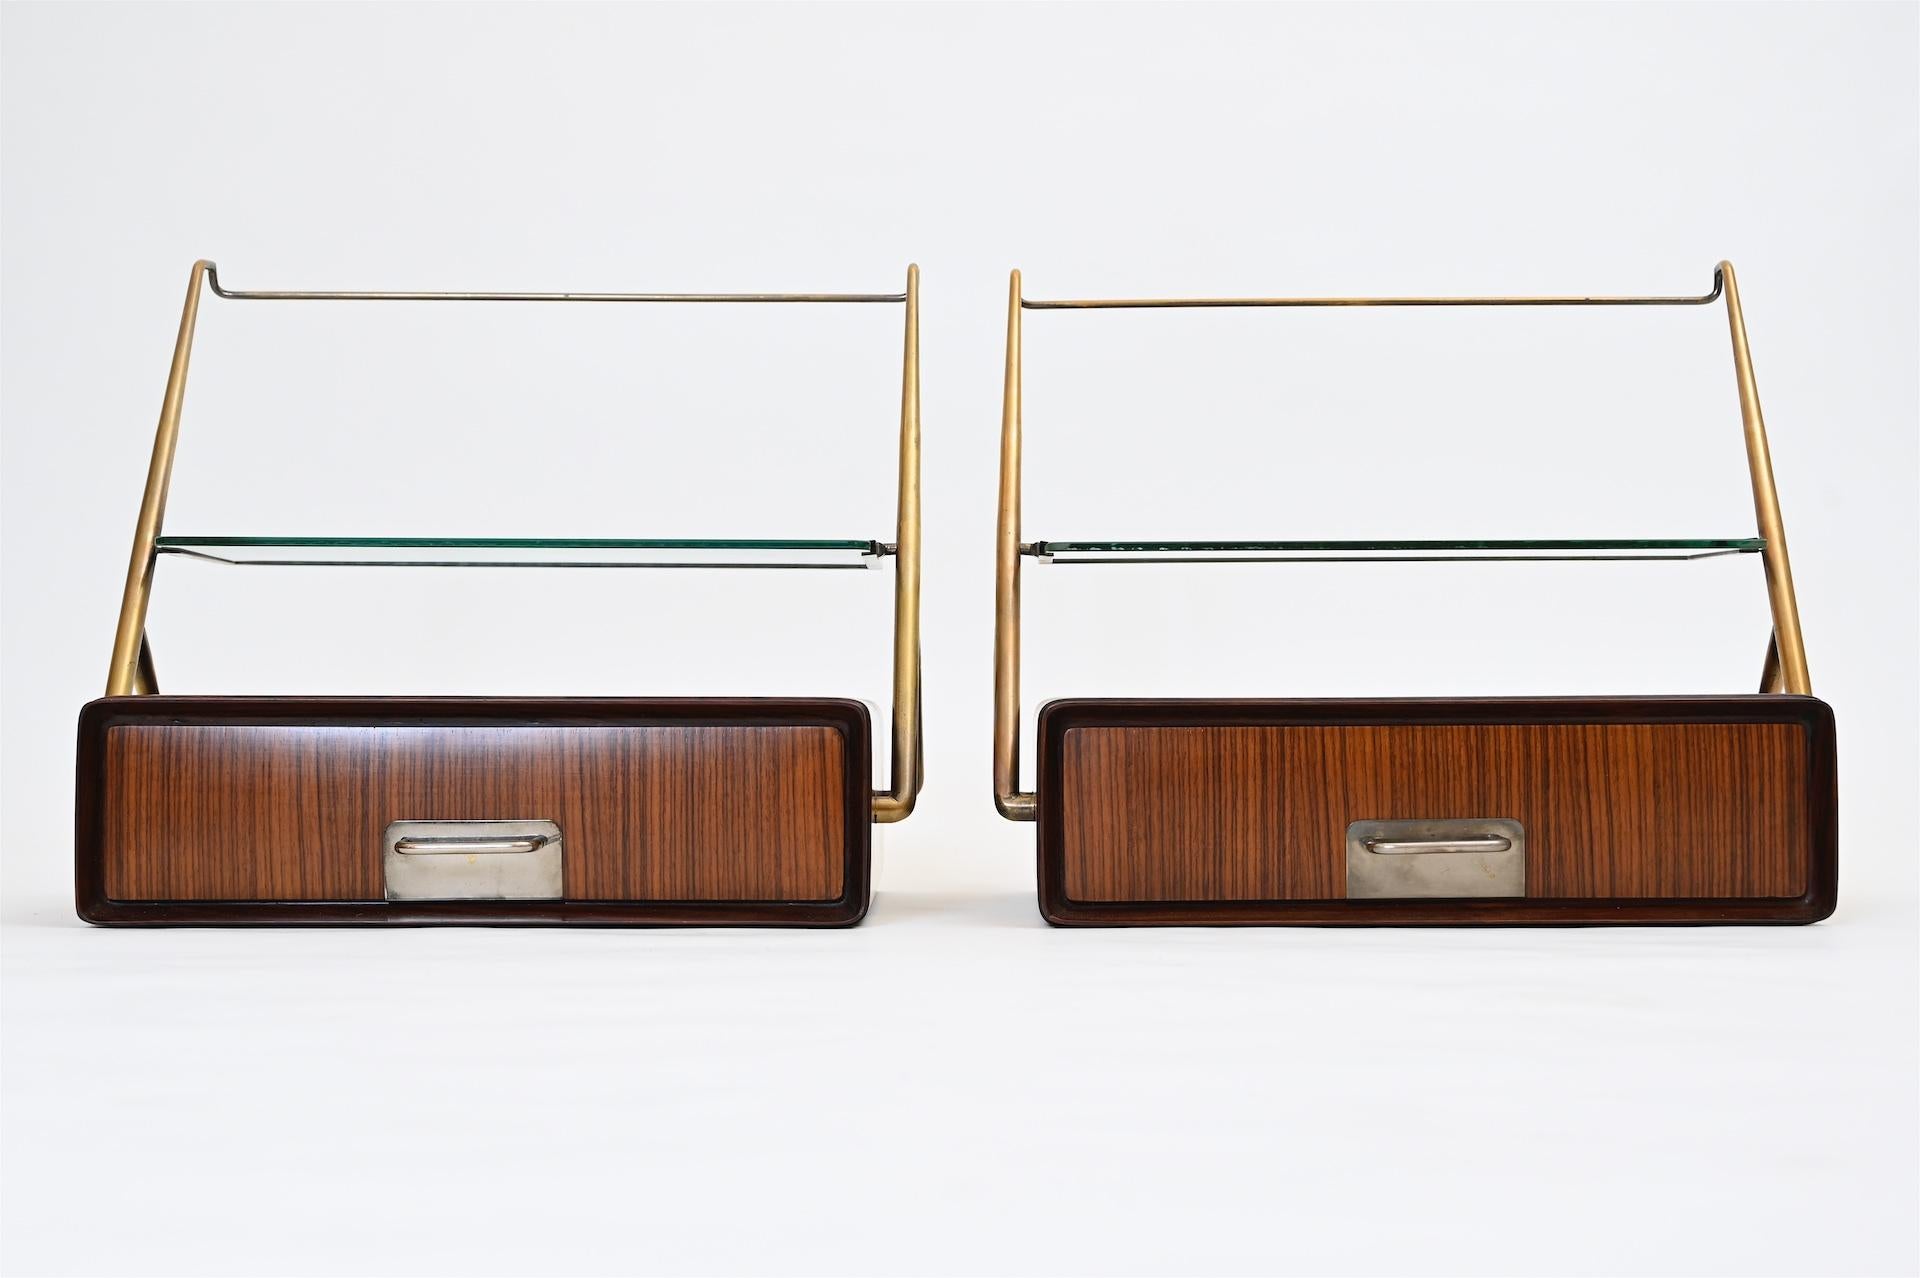 Midcentury bedside cabinets or wall shelves in walnut.

Brass, glass and walnut.